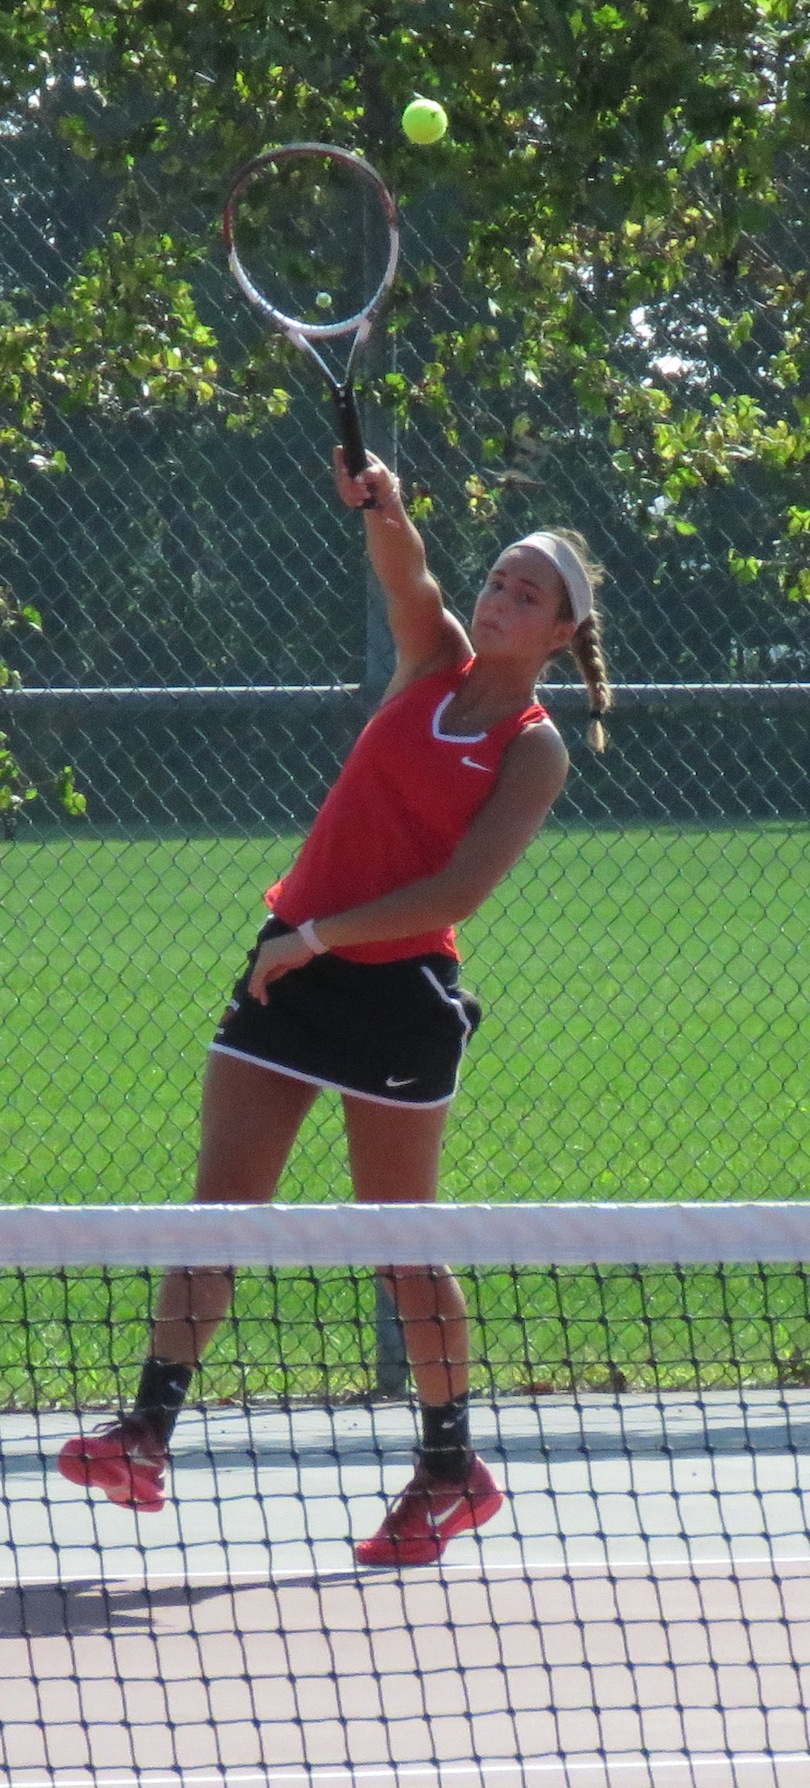 Jocelyn Fike serves during a match versus Grand Island earlier in the season. (Photo by David Yarger)